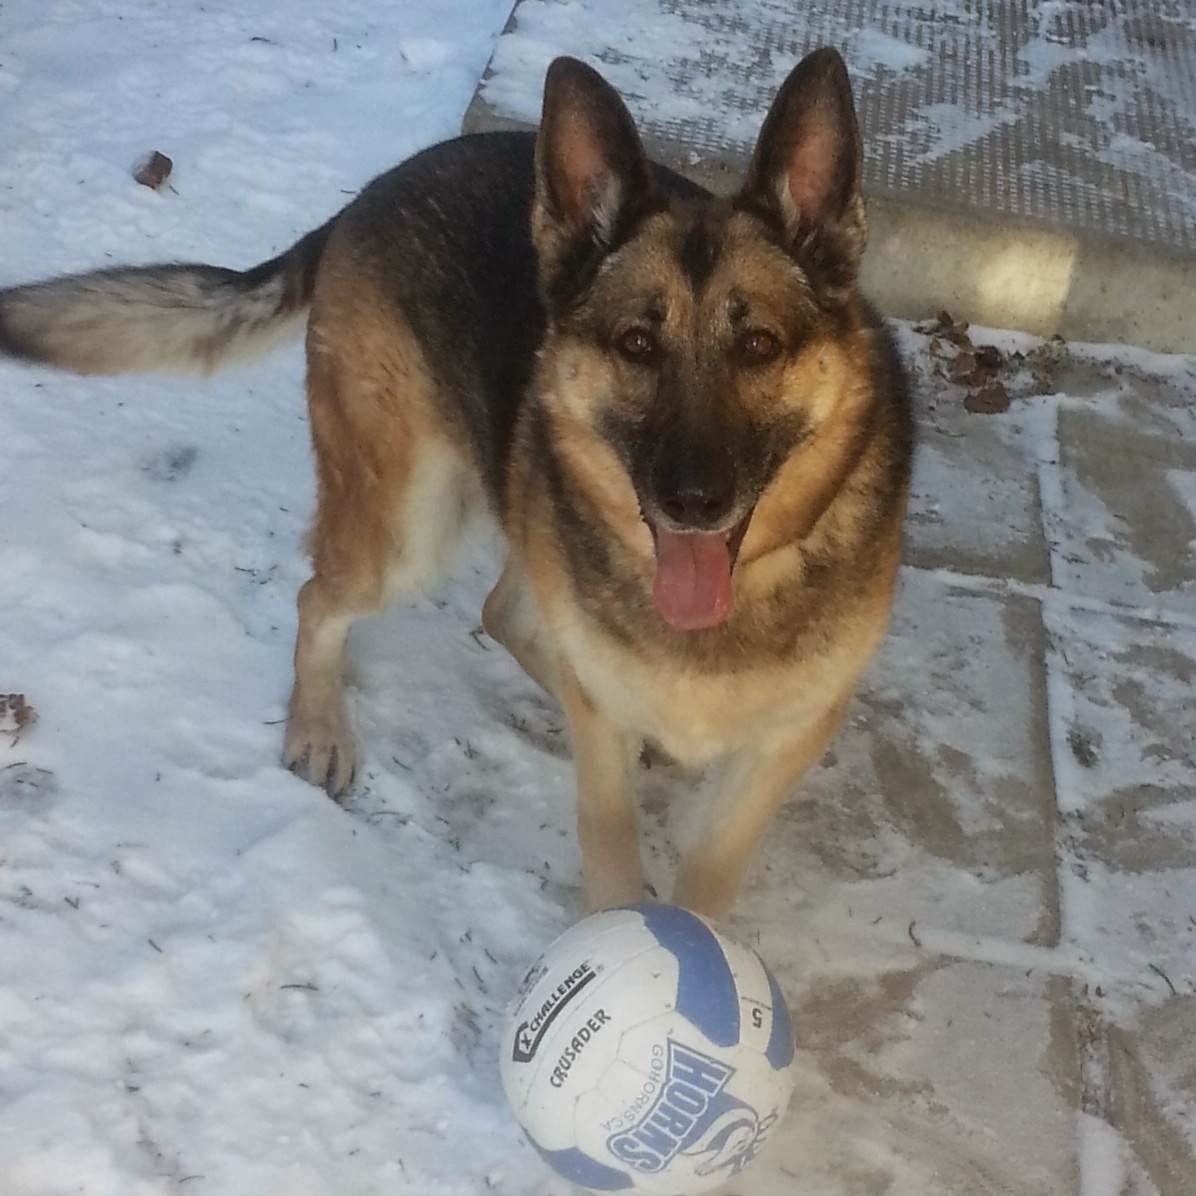 Cute dogs - part 9 (50 pics), german shepherd plays with ball